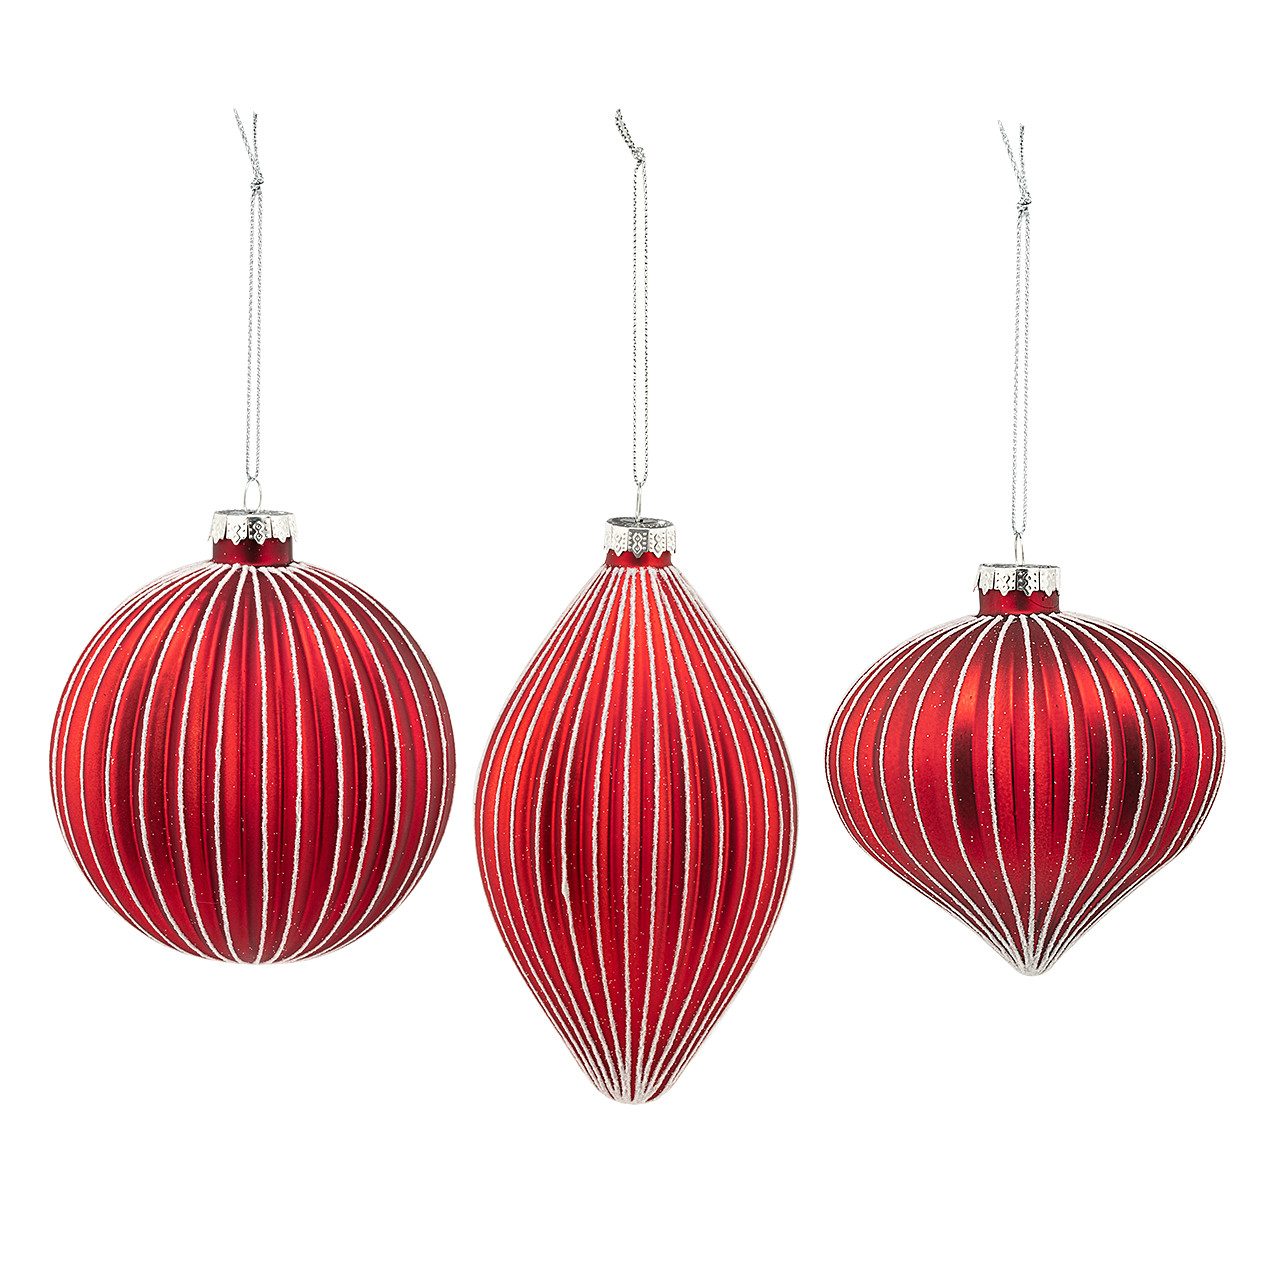 In-Store Only - Red and Silver Onion Ball Ornament Individual Option